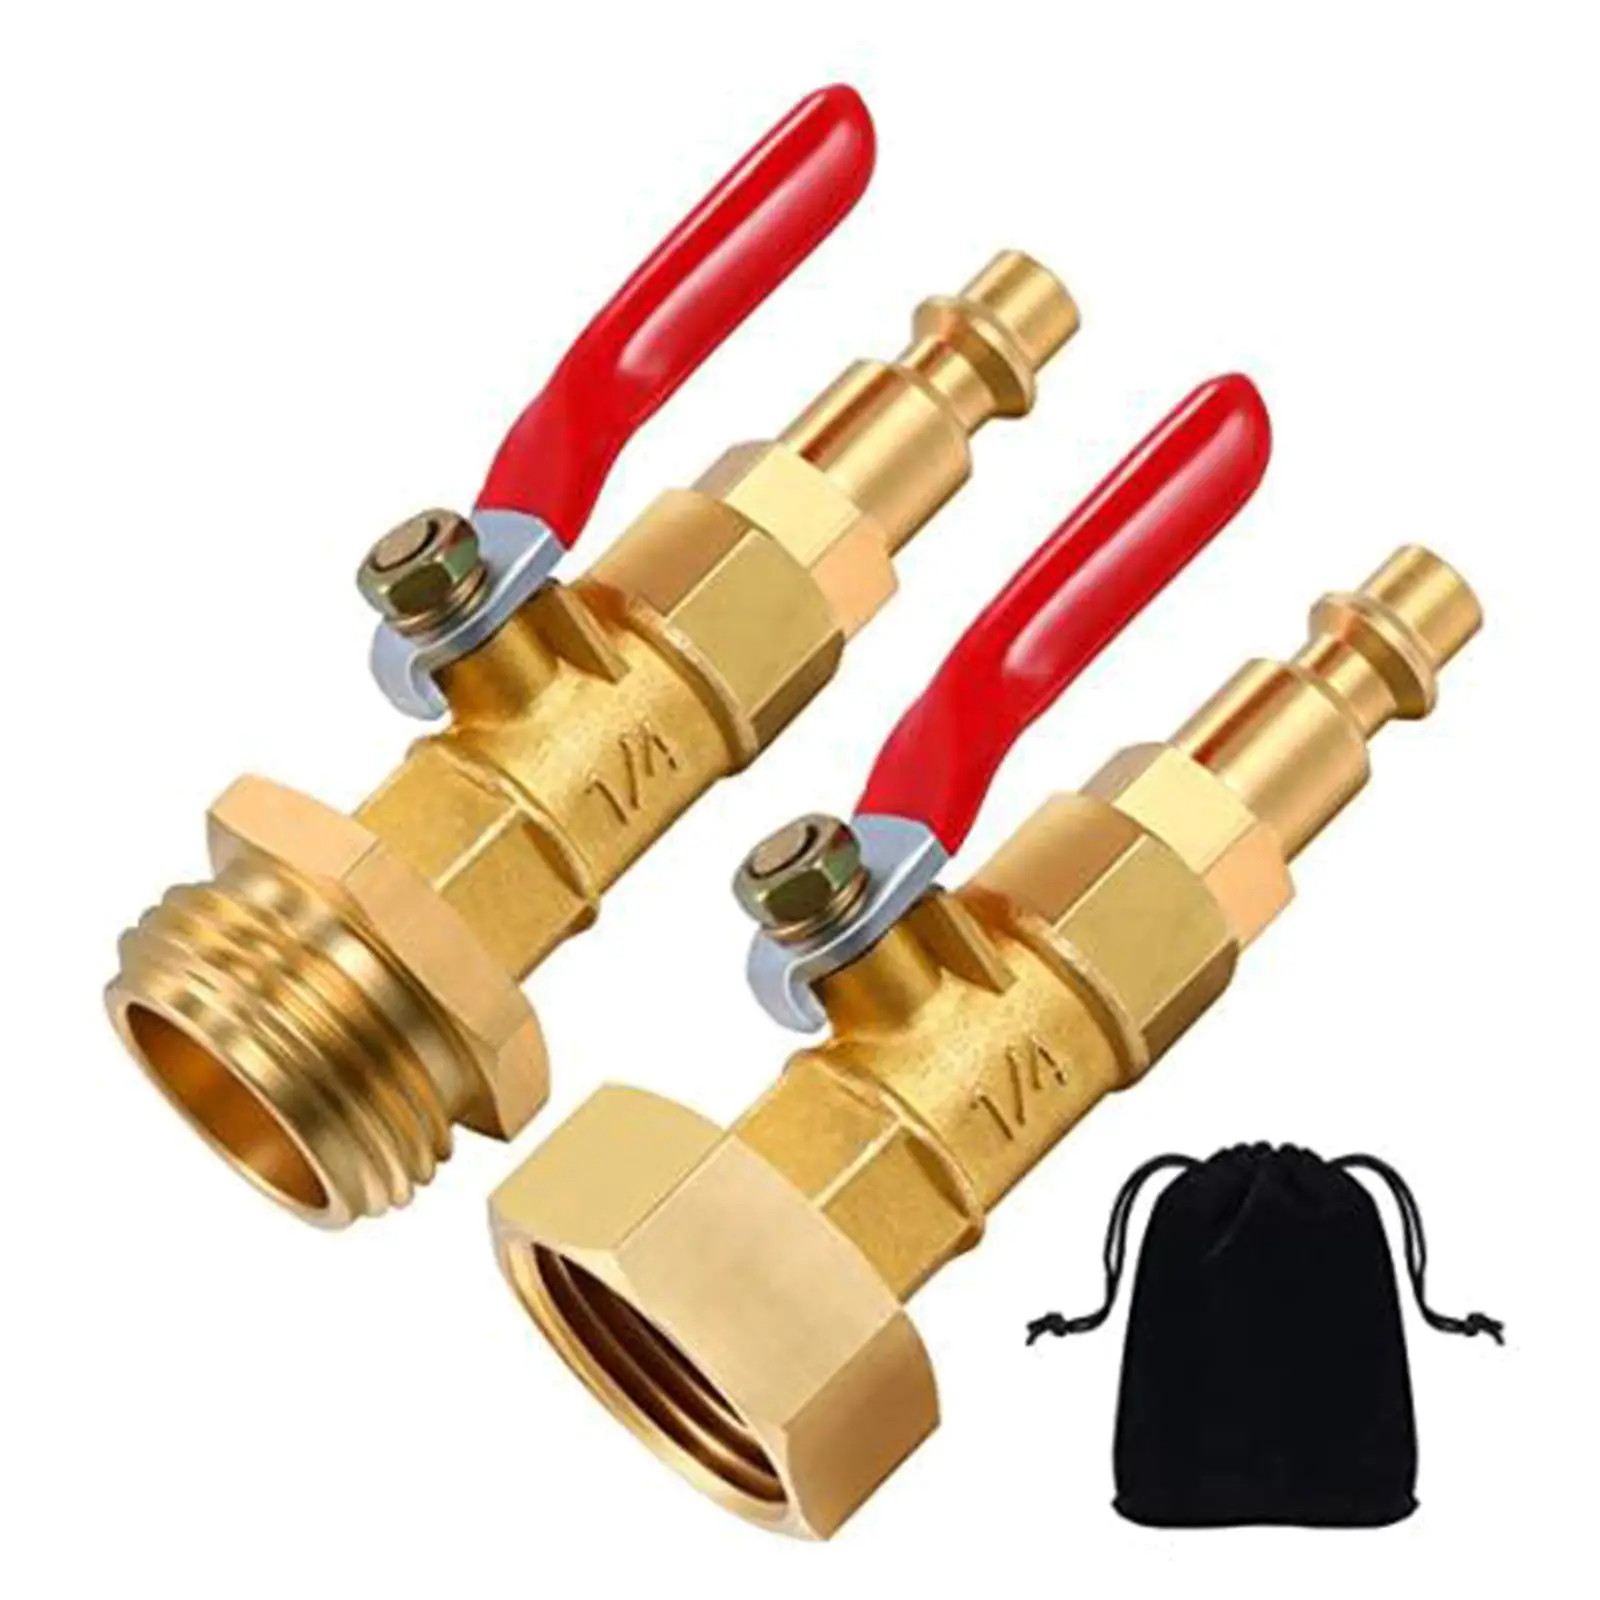 2PCS Brass Winterize Adapter 1/4 Inch Male Quick Connecting Plug & 3/4 inch Male GHT Thread with Ball Valve for RV Boat Trailer